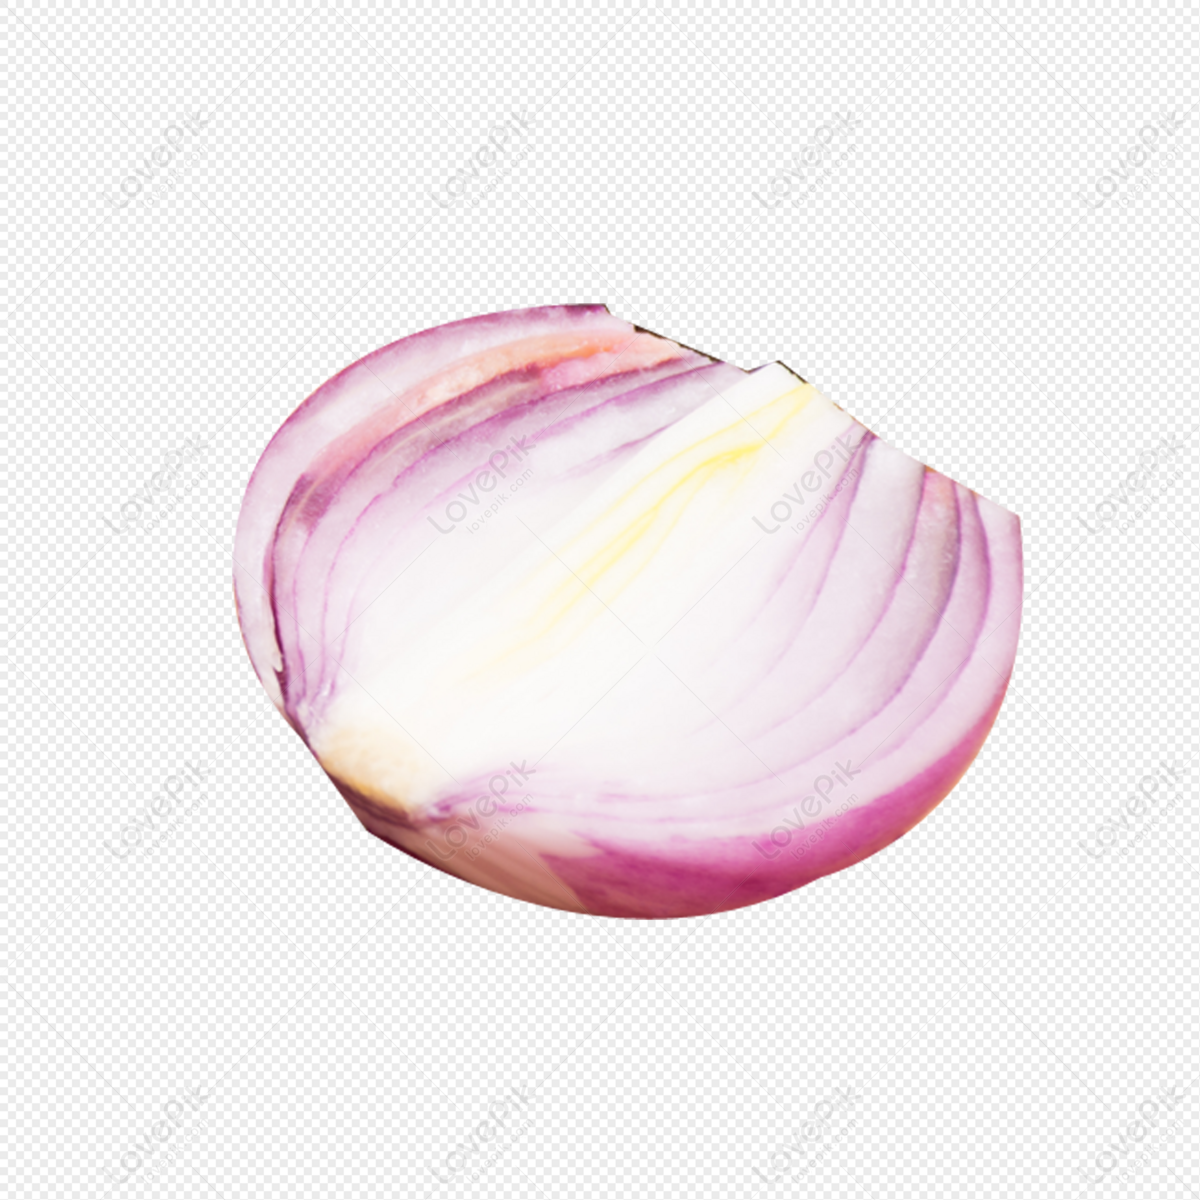 Fresh Vegetable Onion PNG Transparent Image And Clipart Image For Free  Download - Lovepik | 401105647